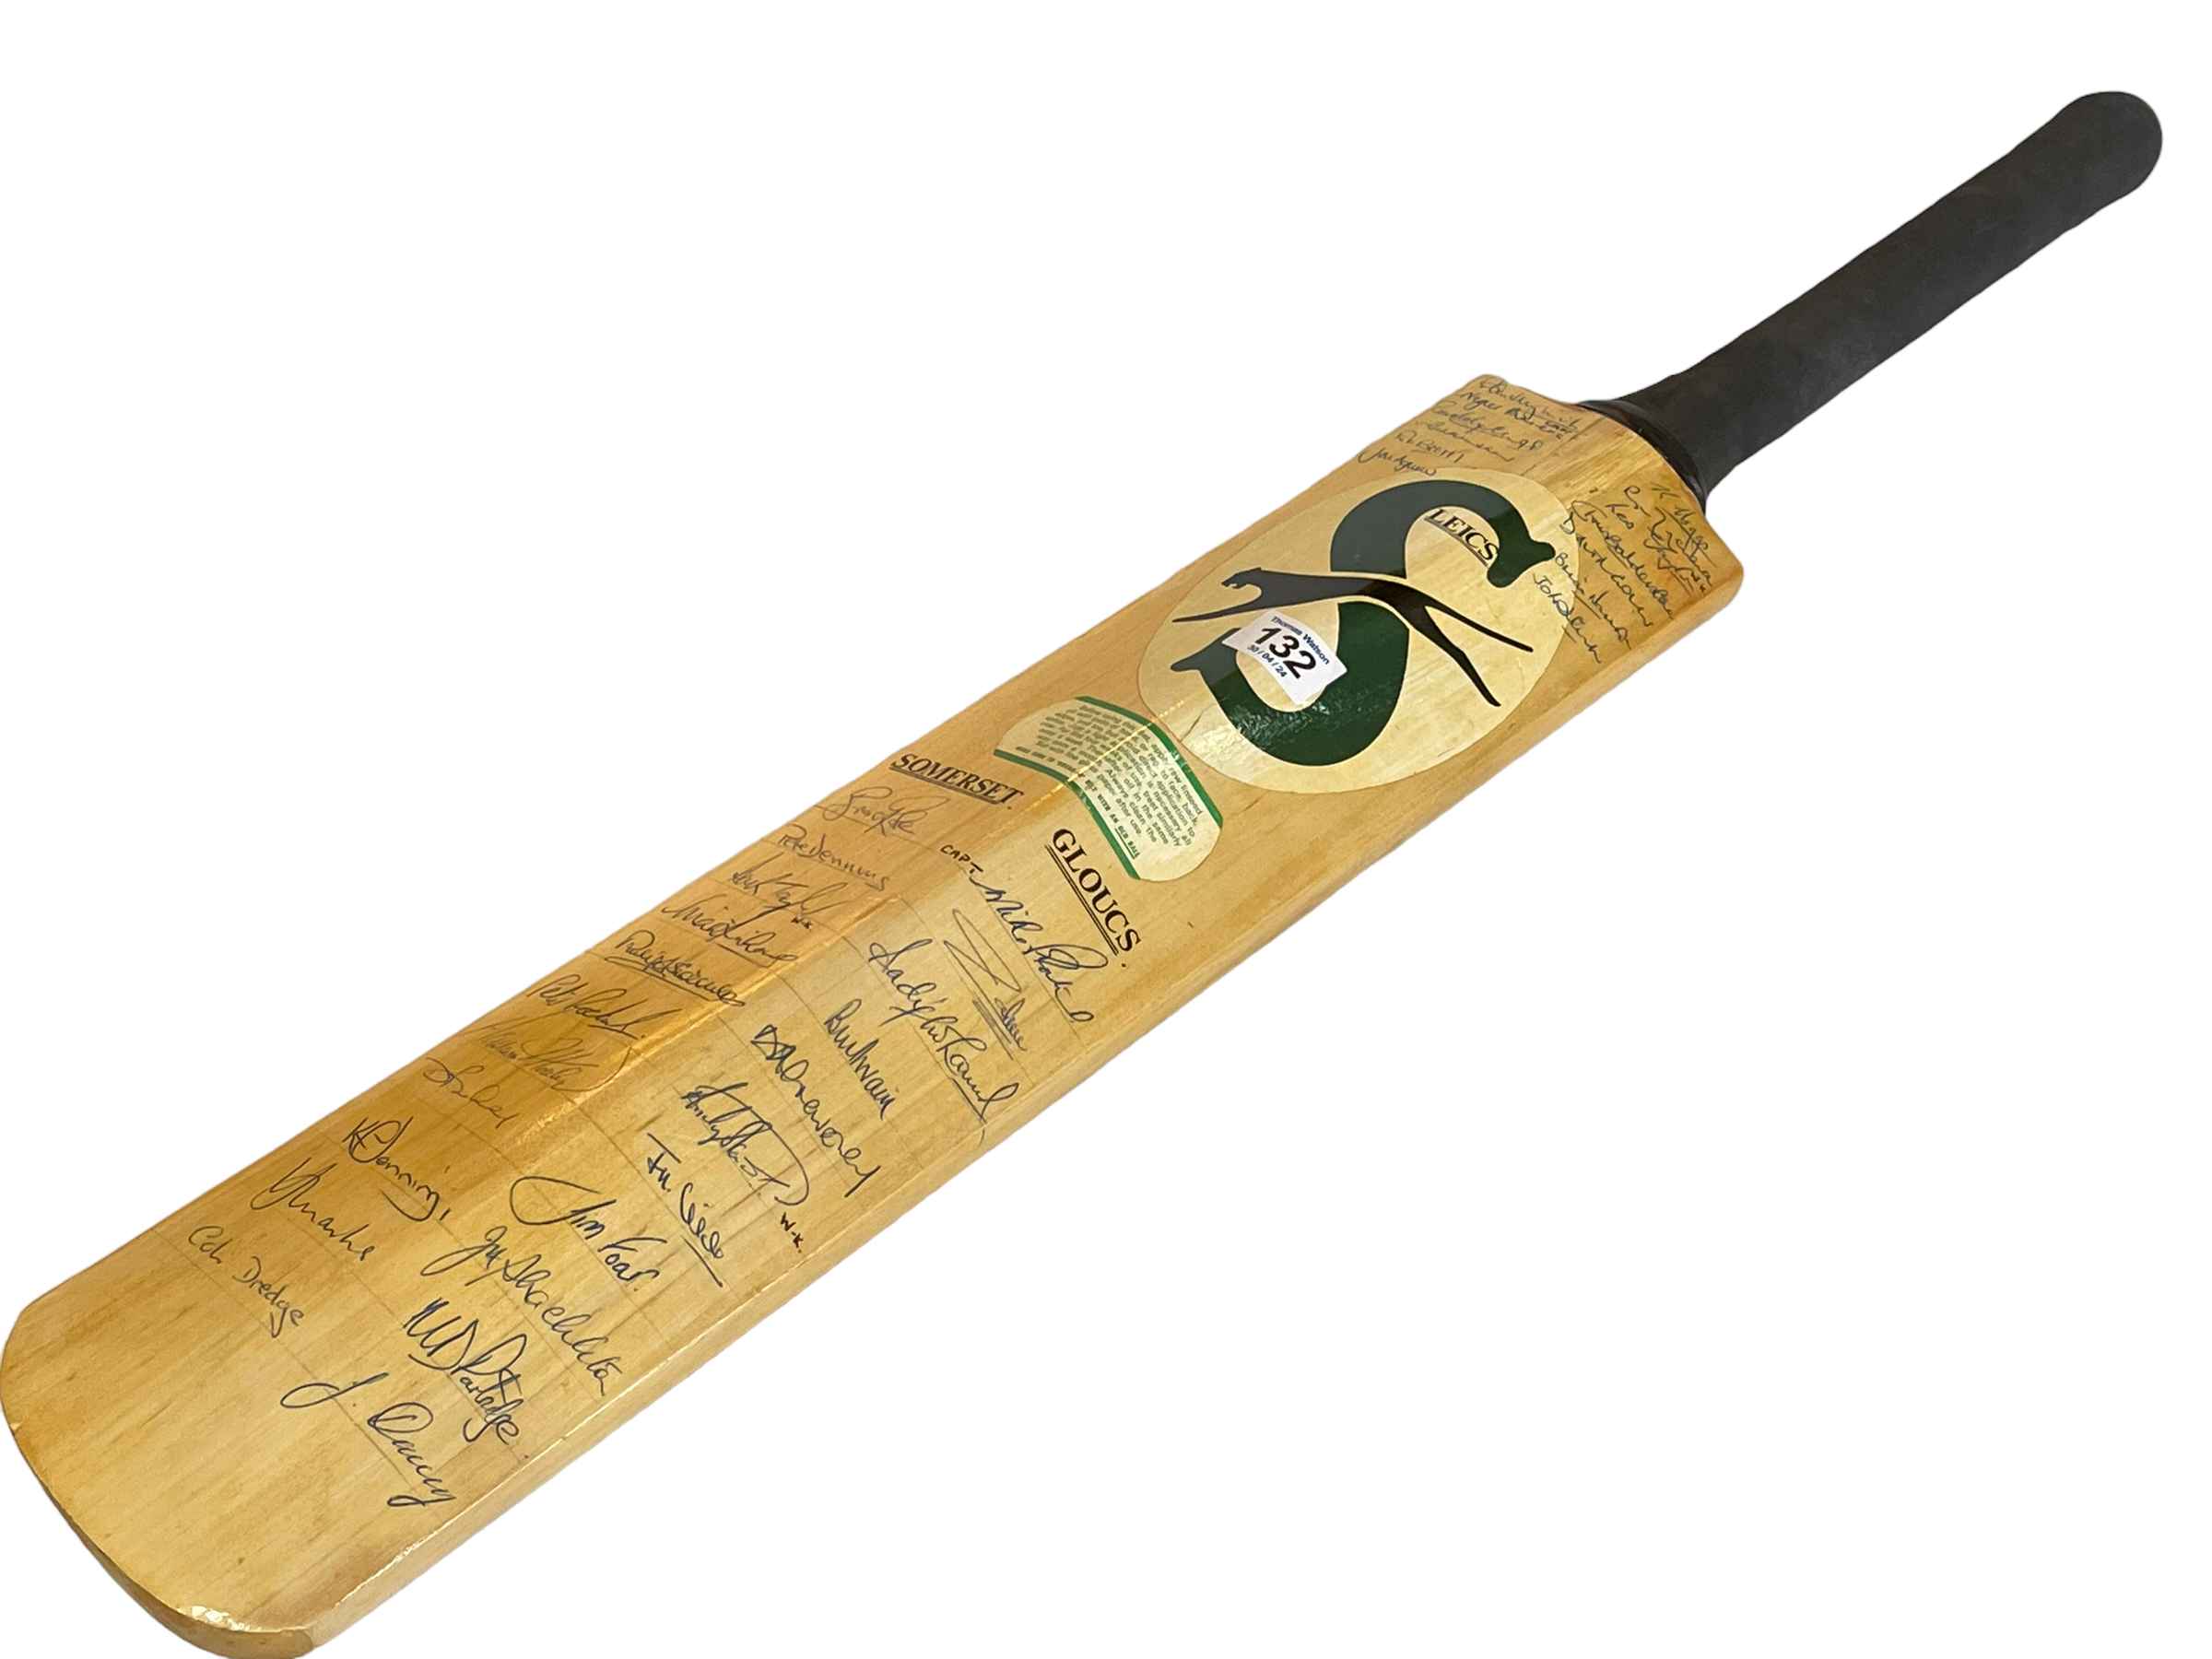 Signed cricket bat including England, Somerset, Leics and Gloucestershire teams. - Image 2 of 2